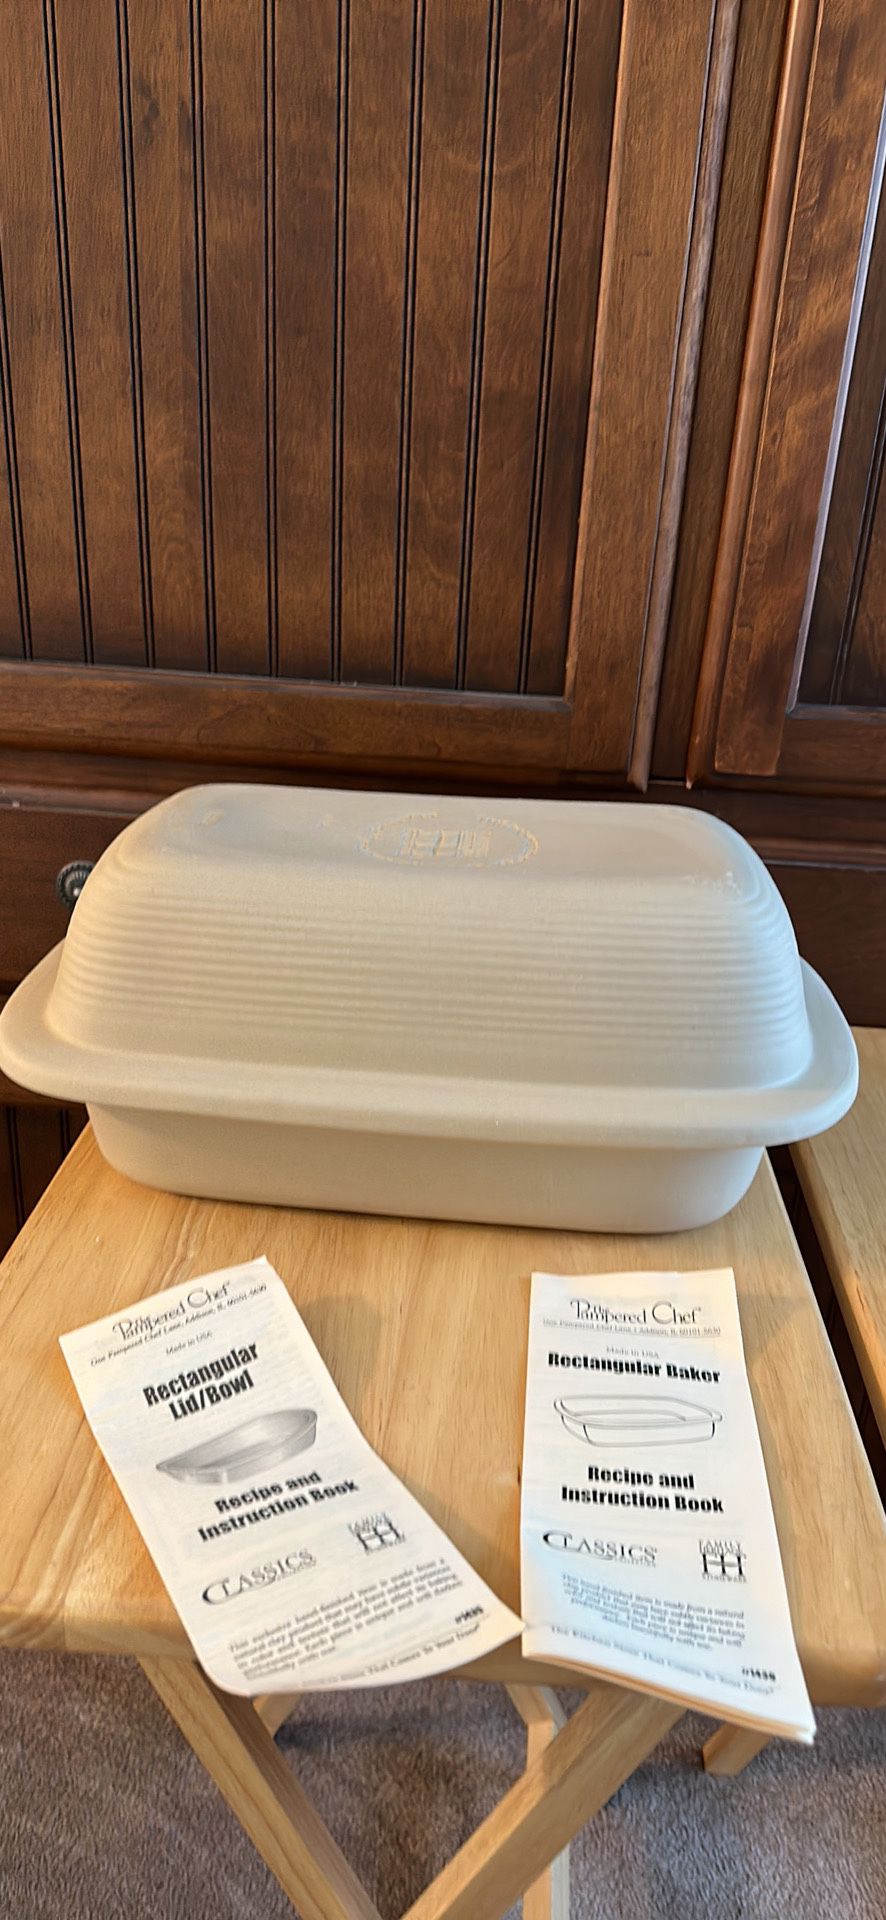 NEW PREPOLOGY & PAMPERED CHEF utensils for Sale in Erie, PA - OfferUp